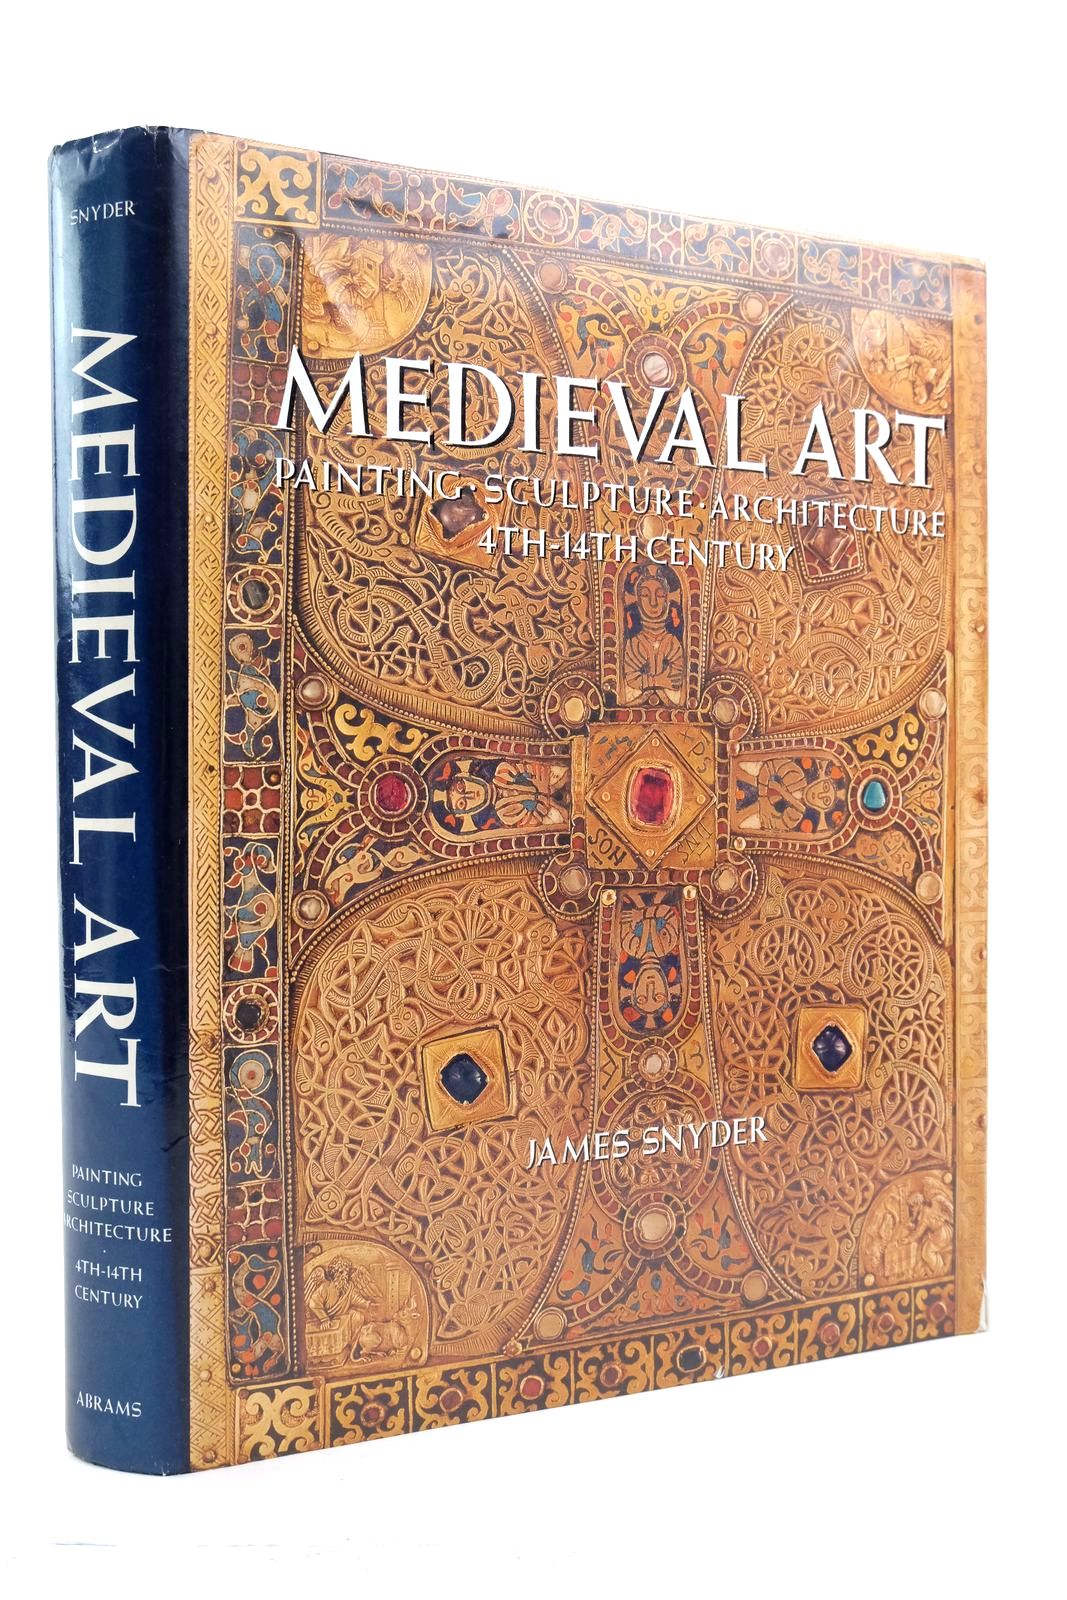 Photo of MEDIEVAL ART: PAINTING, SCULPTURE, ARCHITECTURE 4TH - 14TH CENTURY written by Snyder, James published by Harry N. Abrams, Inc. (STOCK CODE: 2138986)  for sale by Stella & Rose's Books